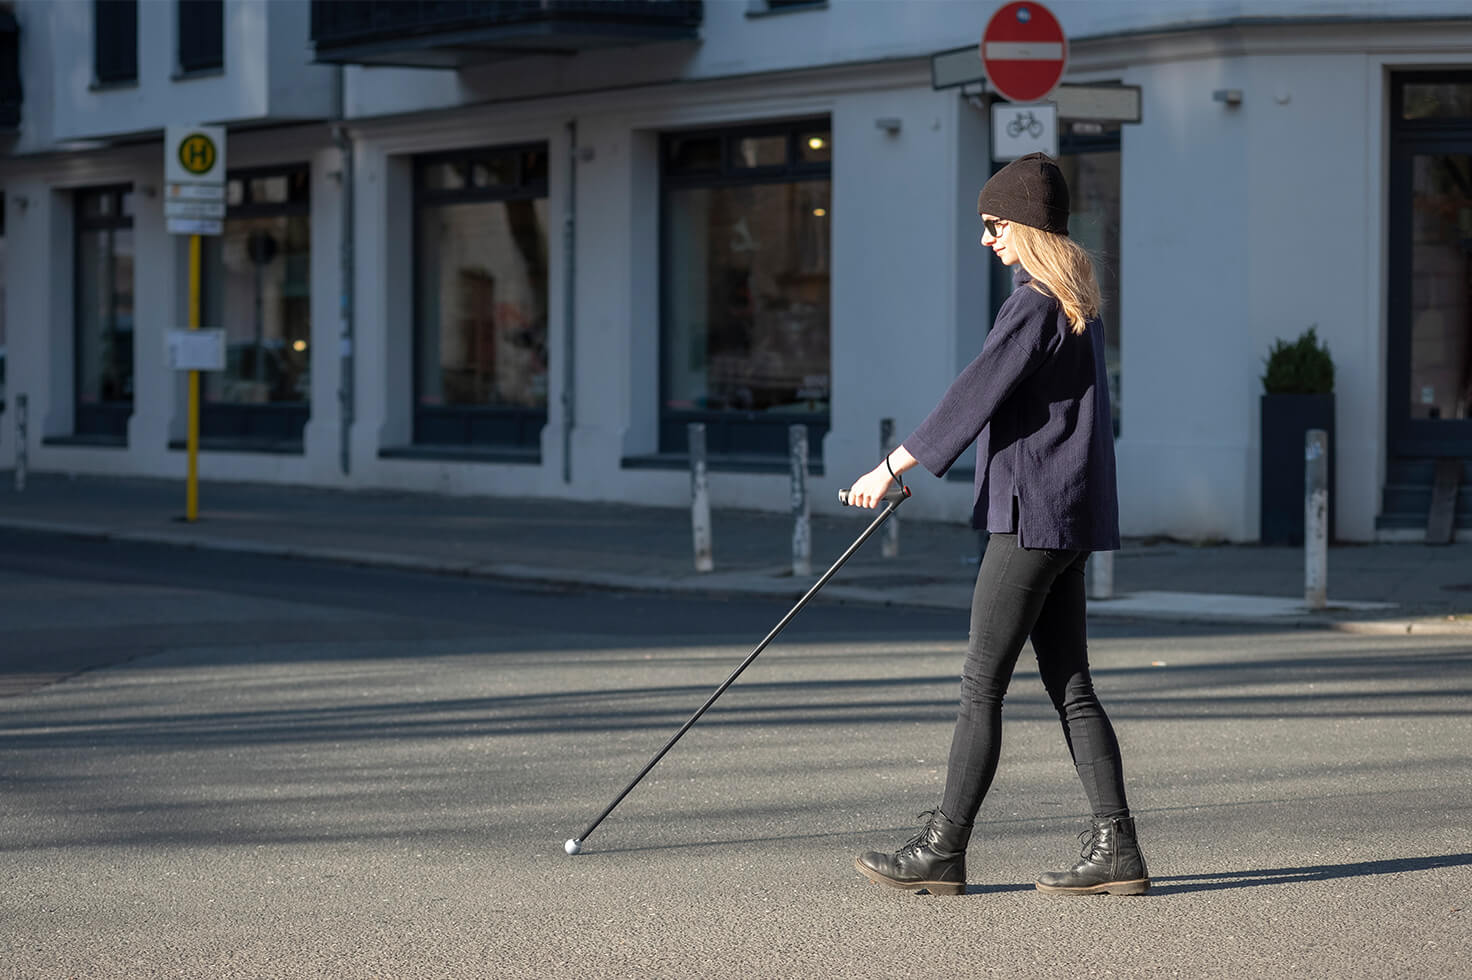 Sense Five helps the visually impaired - DesignWanted : DesignWanted